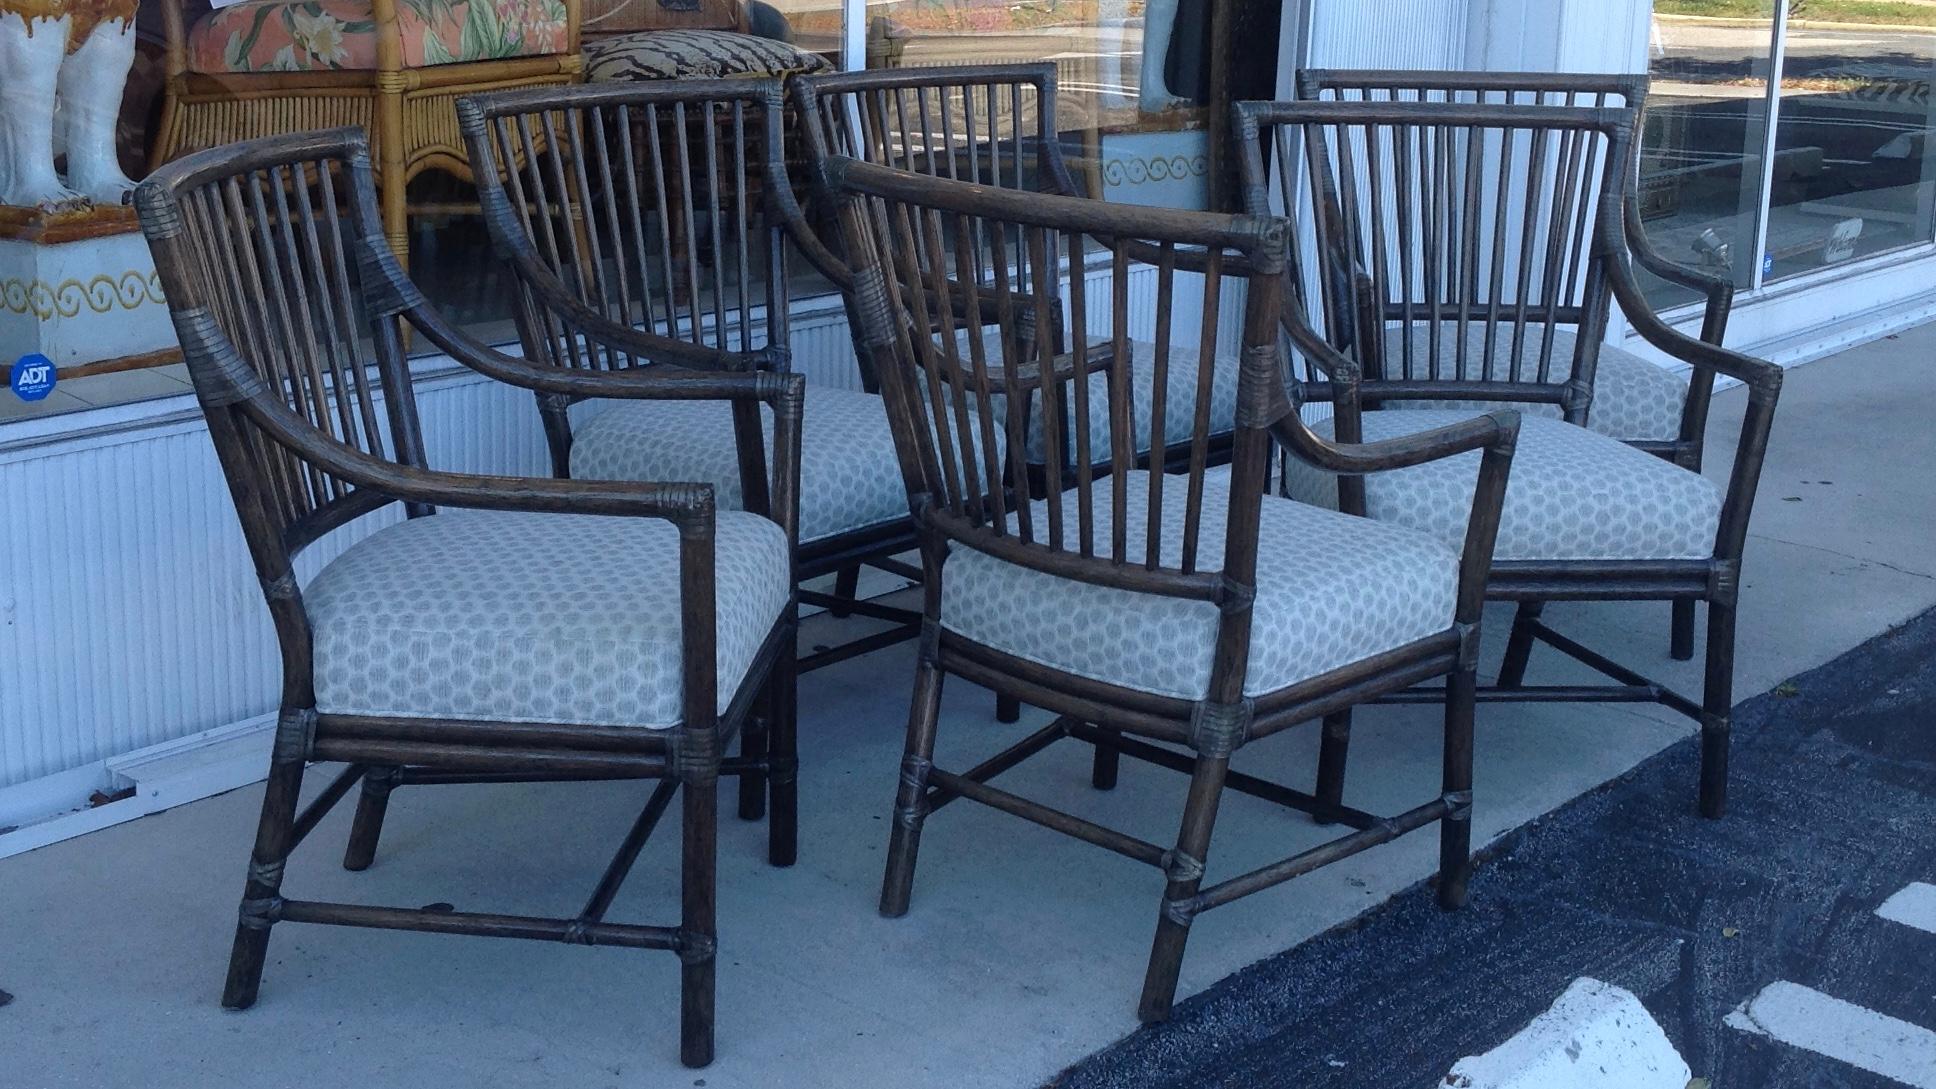 Elegant and Classic design finished with a rich dark olive hue. Each chair bears its original metal McGuire tag.